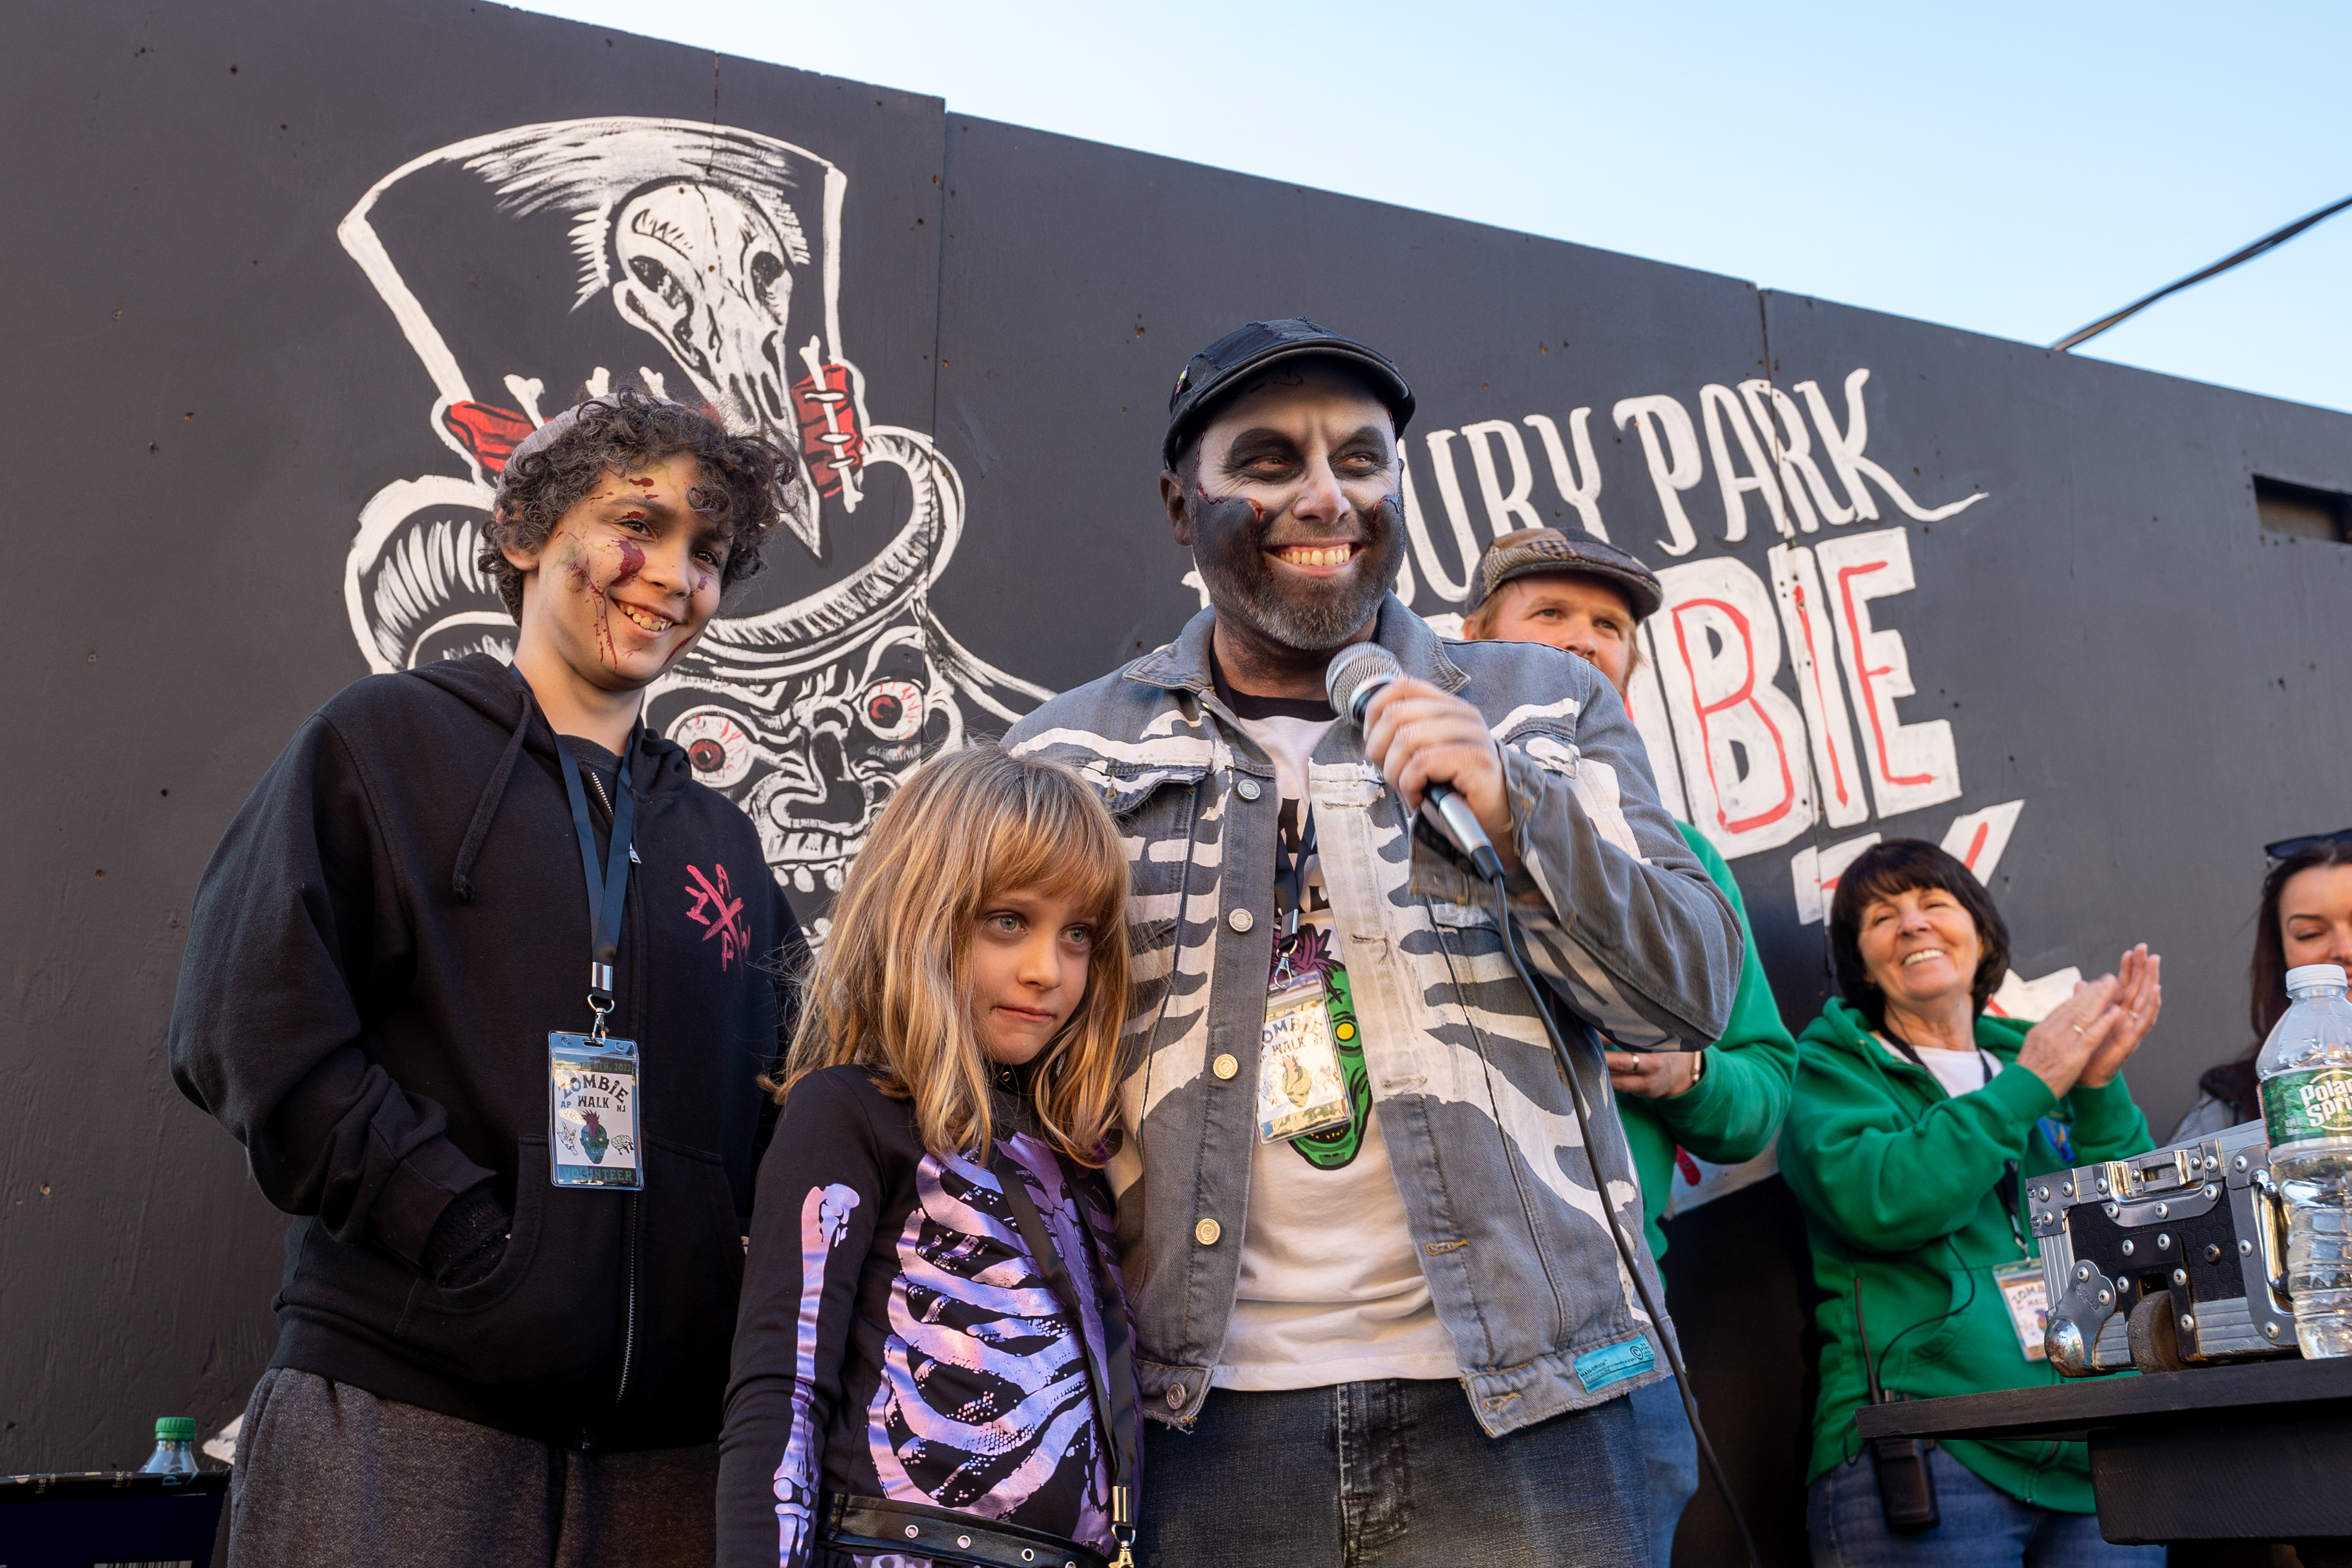 Jason Meehan, the founder of Asbury Park Zombie walk, stands on stage with his family during the 14th Asbury Park Zombie Walk in Asbury Park on Saturday, October 8, 2022. The zombie walk held its first themed year with the theme being 80's and 90's punk and metal.